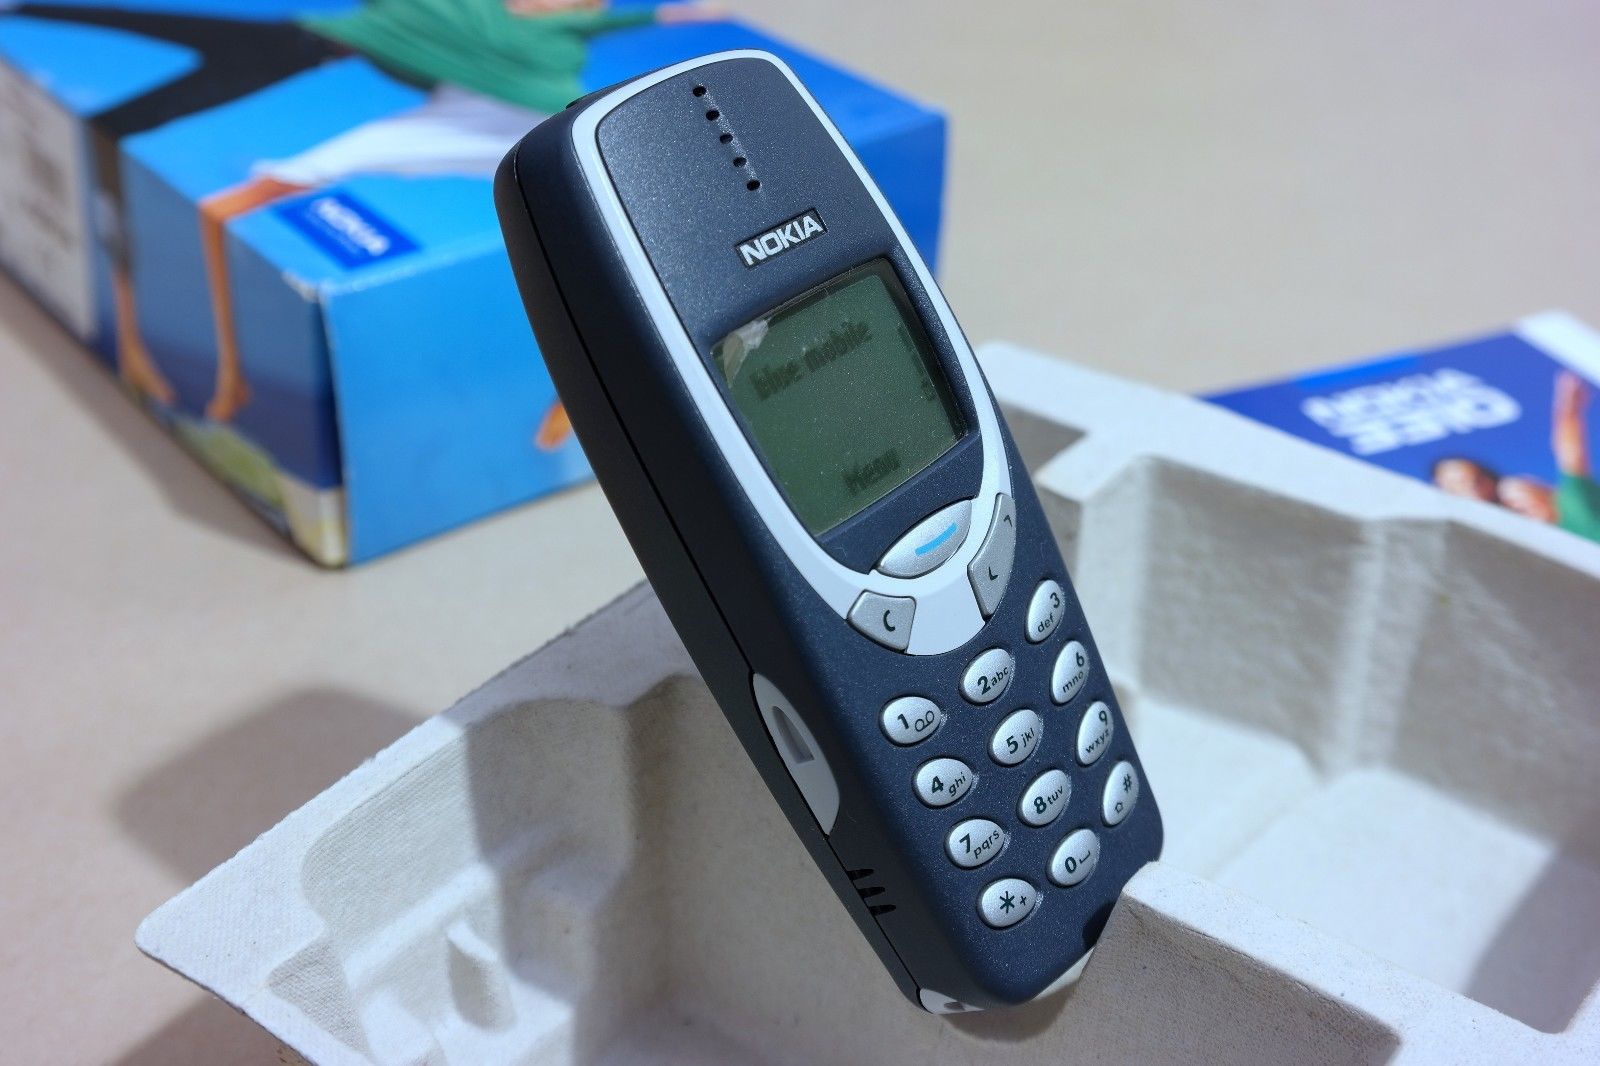 Nokia 3310 returns: HMD Global to relaunch iconic mobile phone at MWC 2017  - Mirror Online